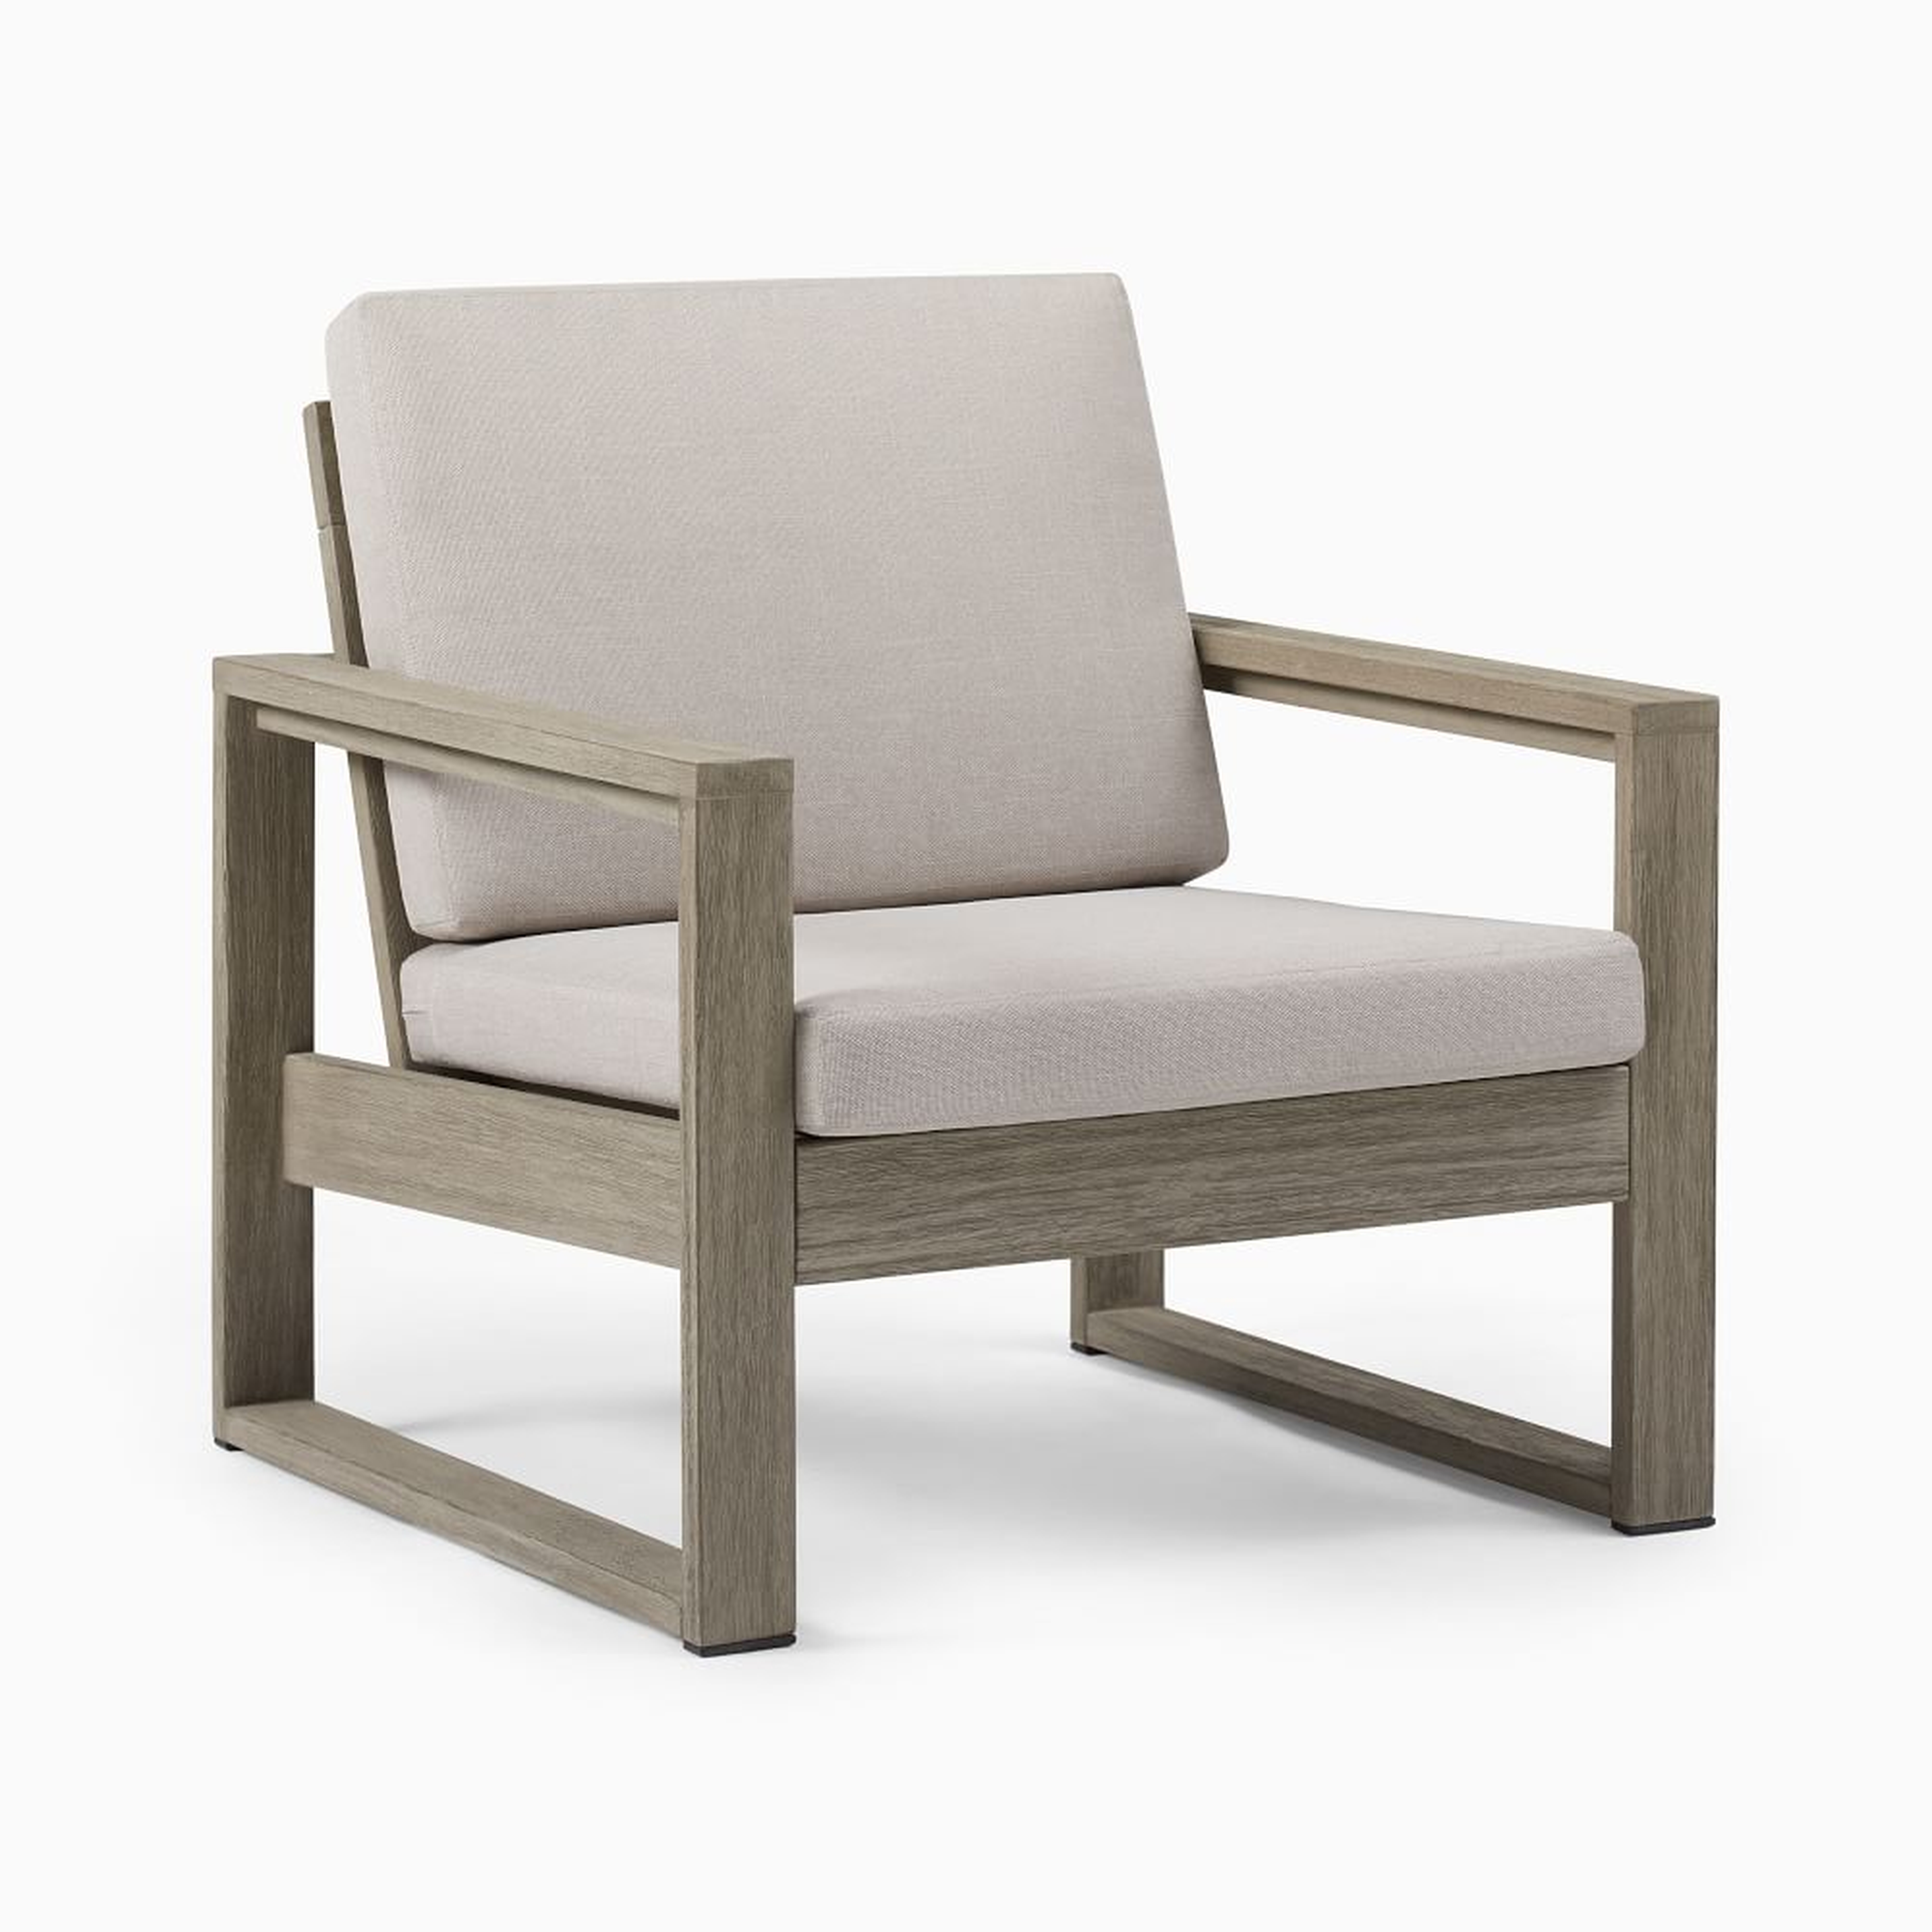 Portside Lounge Chair, Petite Lounge Chair Pack, Weathered Gray/Gray - West Elm